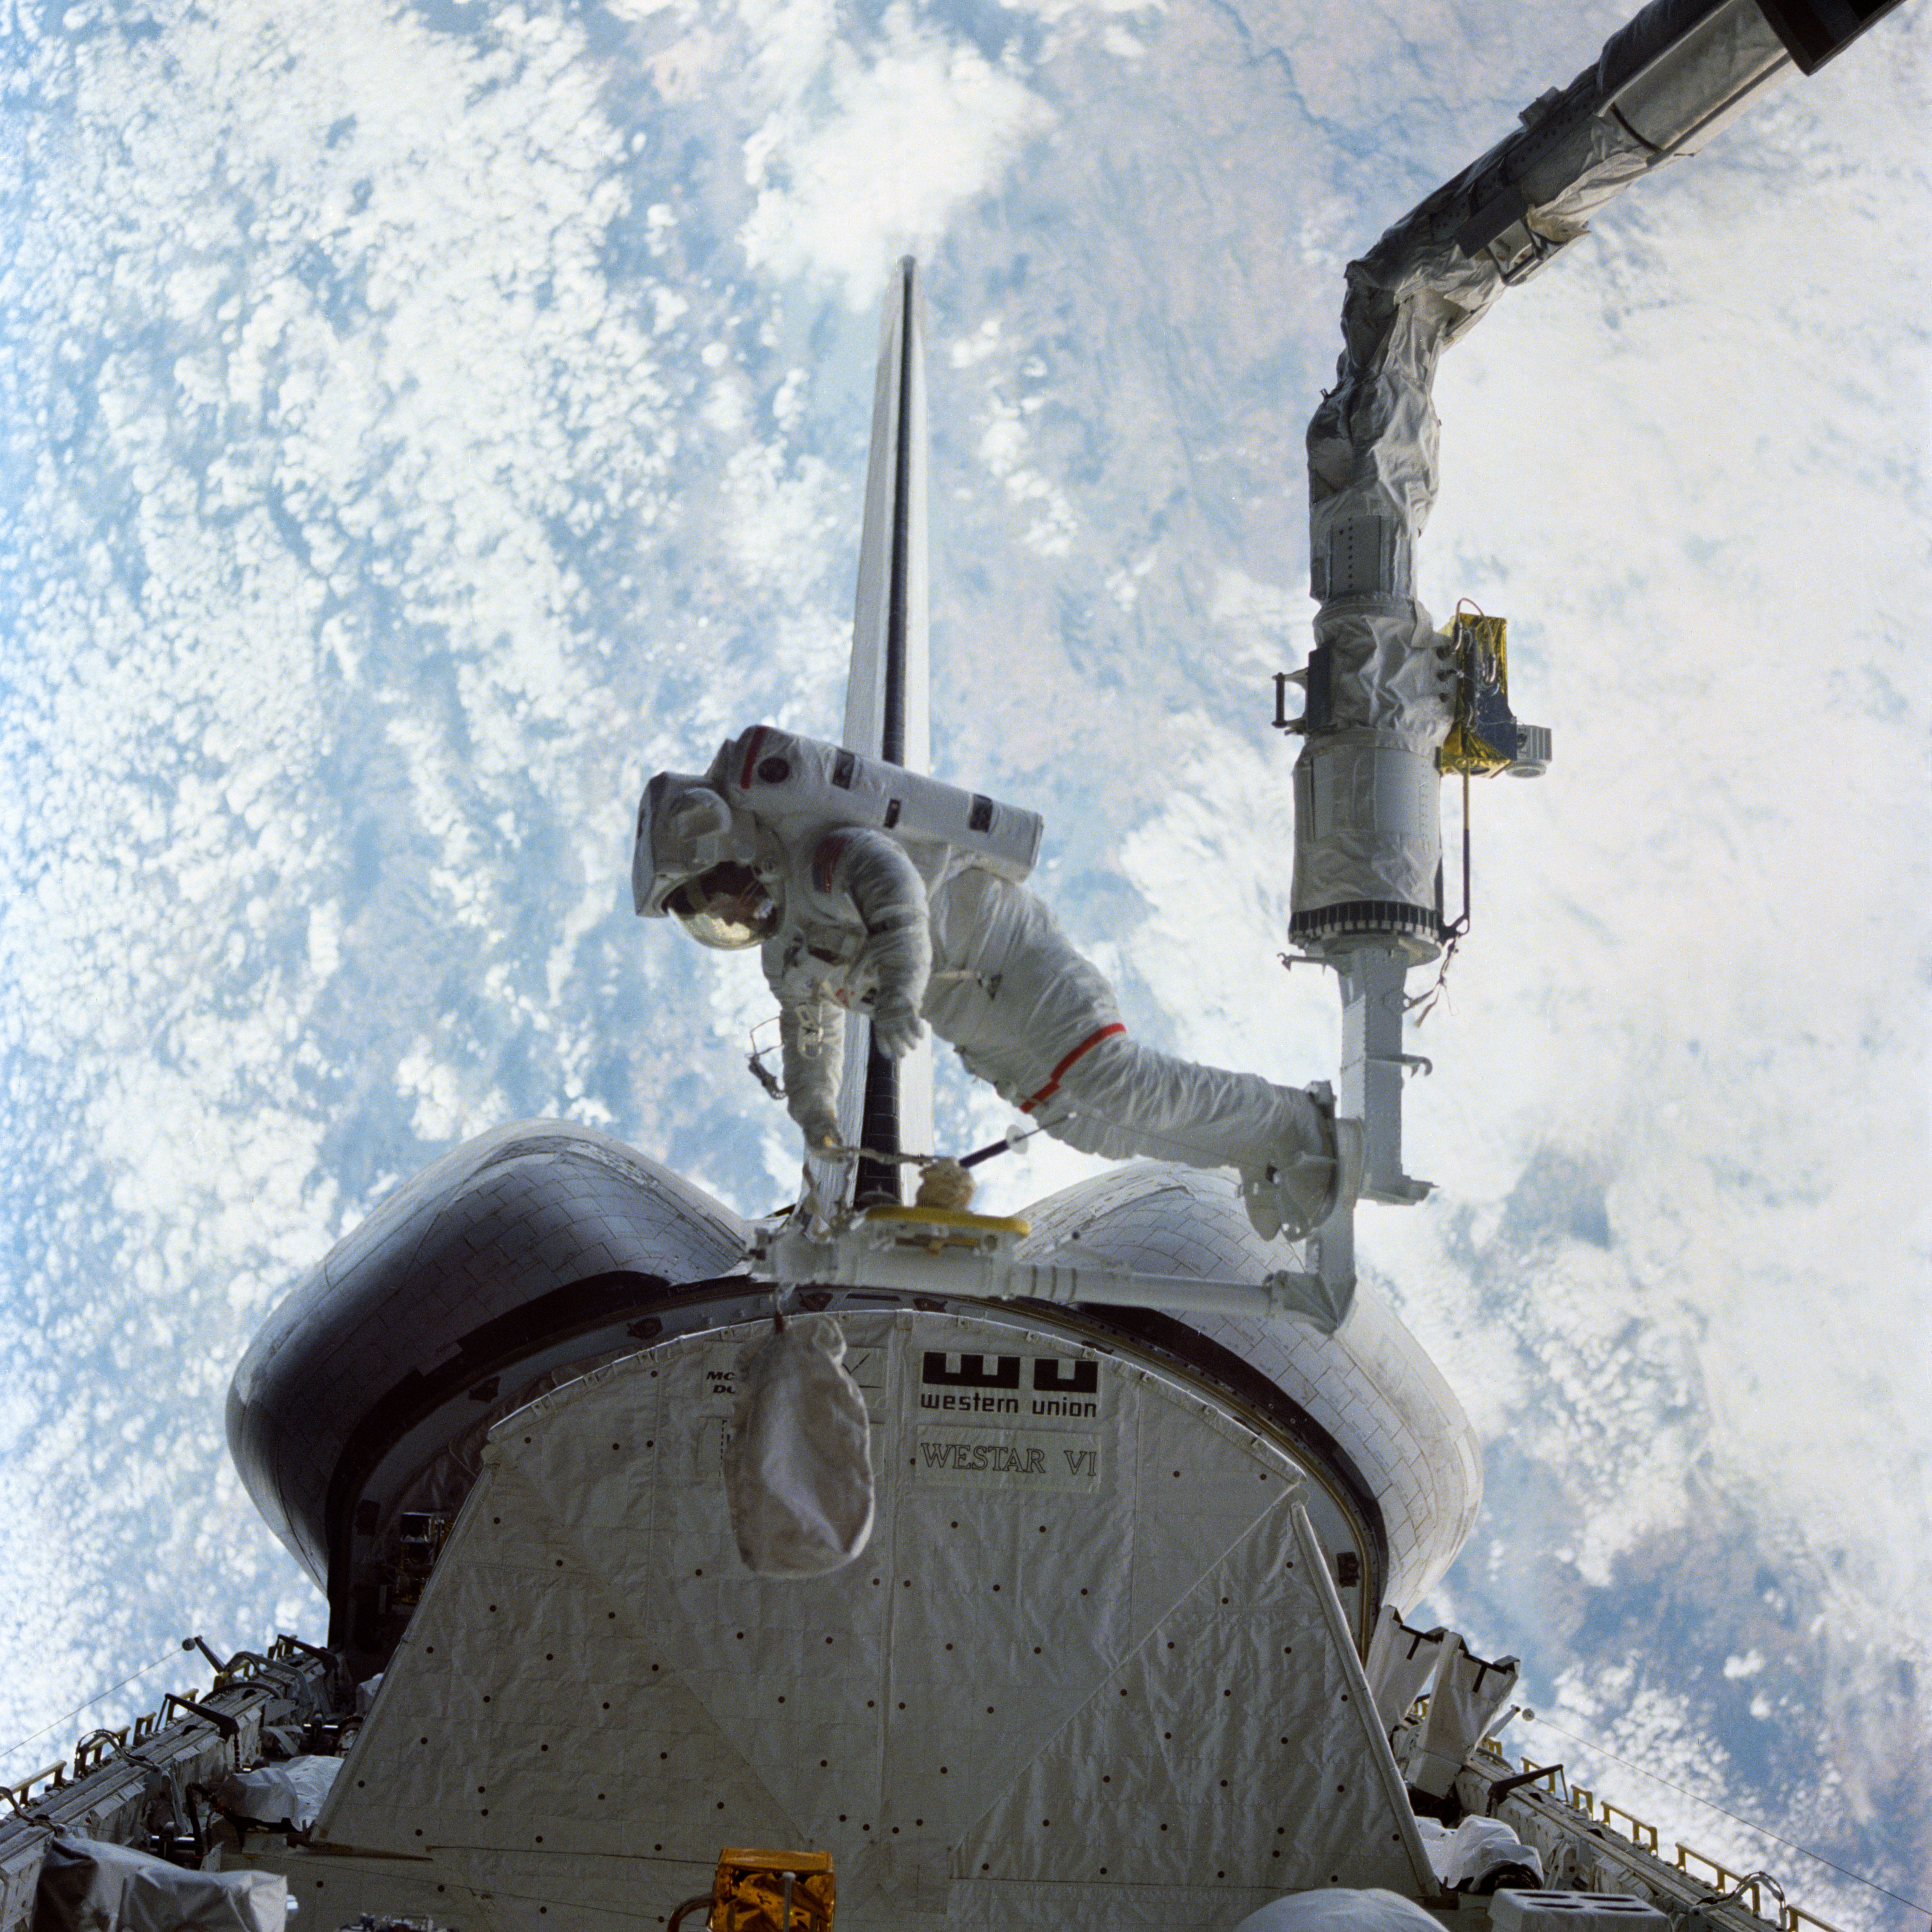 View of Bruce McCandless testing the Manipulator Foot Restraint at the end of the Remote Manipulator System, operated by Ronald E. McNair